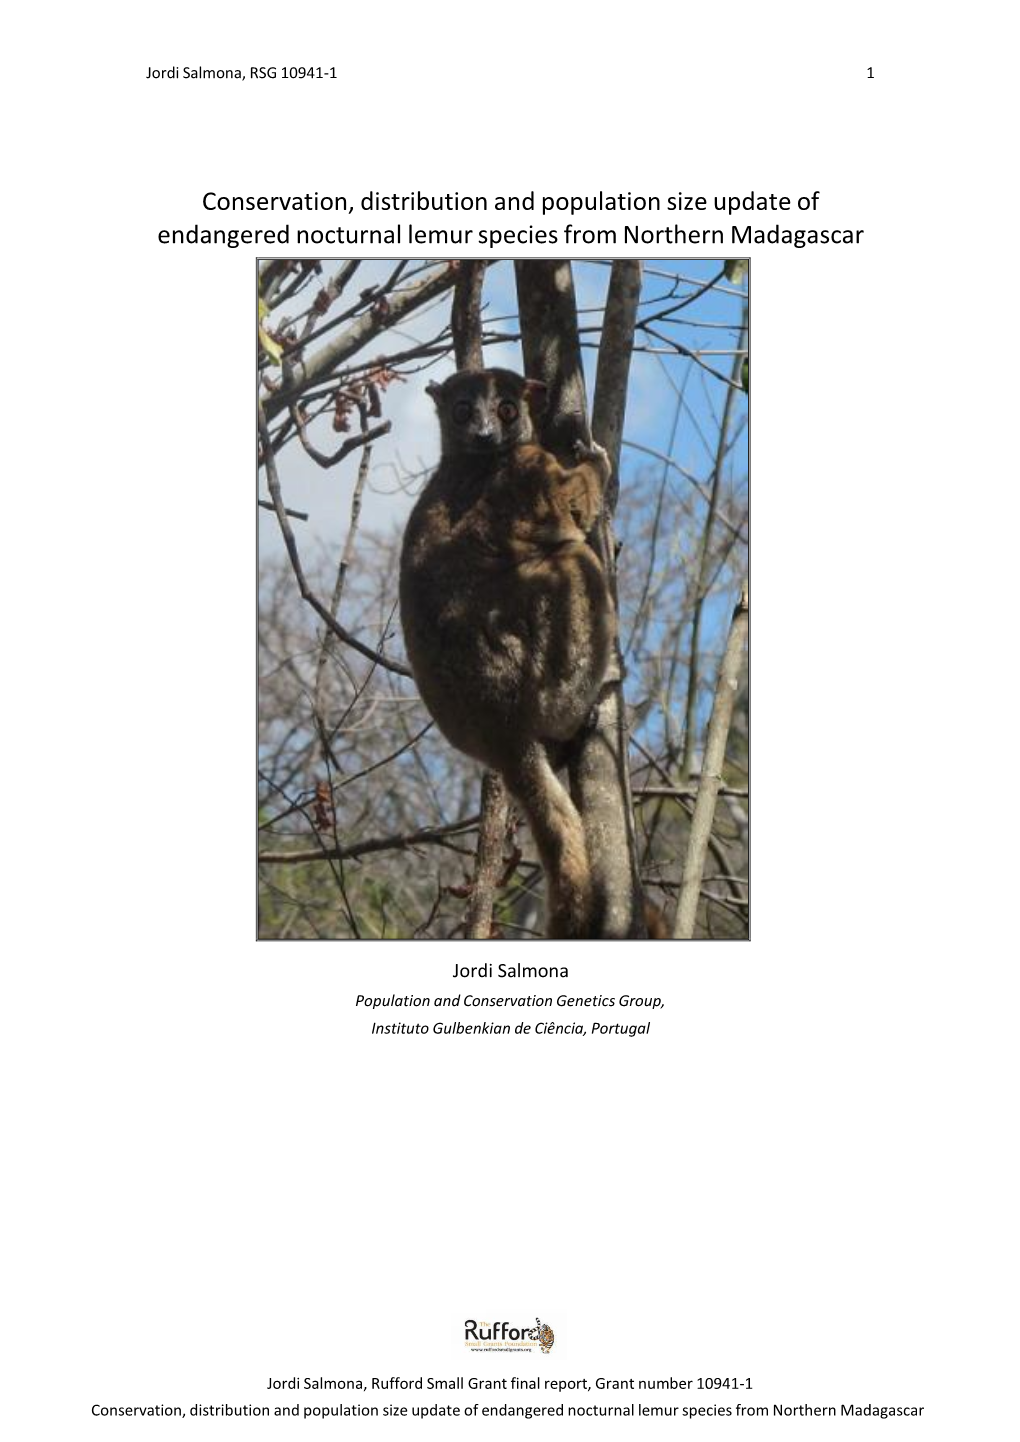 Conservation, Distribution and Population Size Update of Endangered Nocturnal Lemur Species from Northern Madagascar